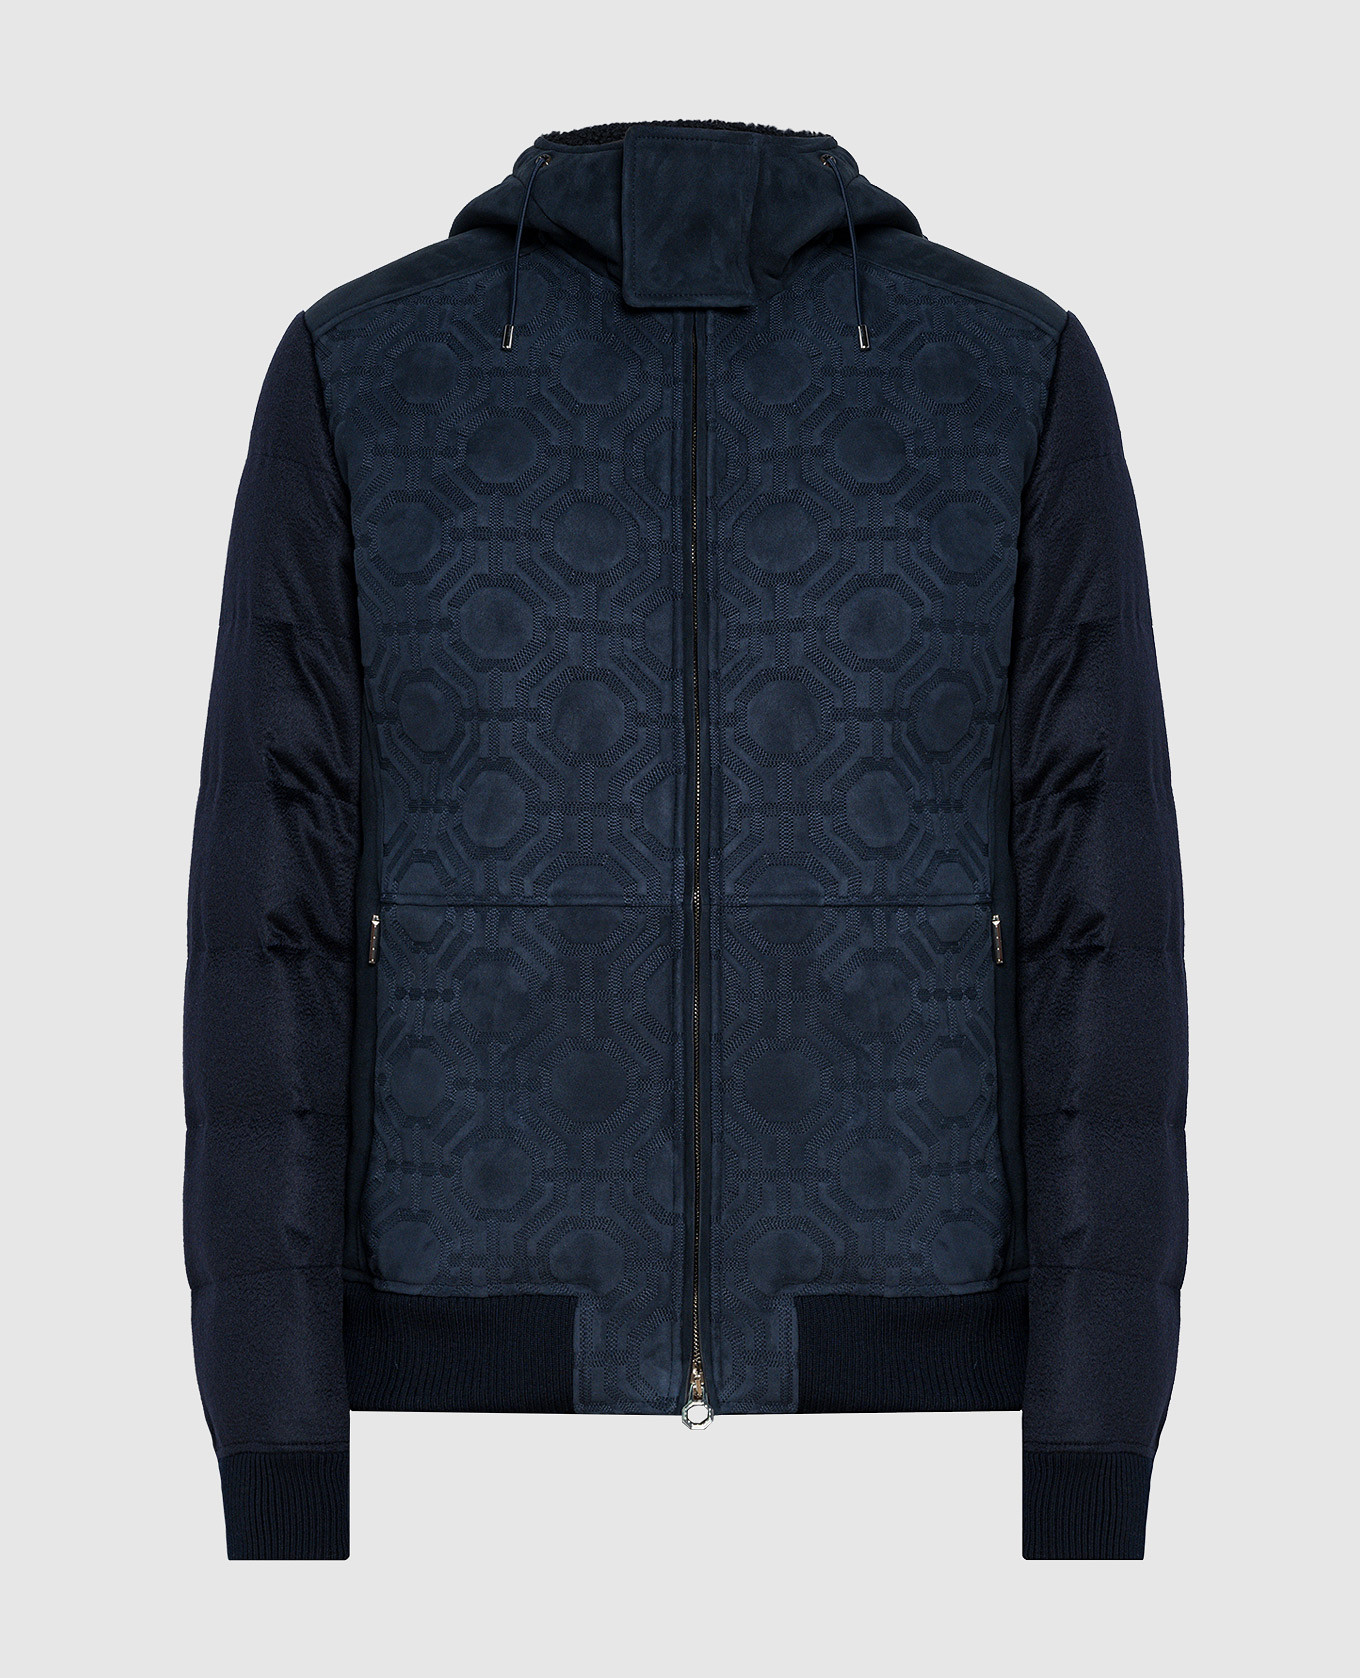 Blue combined cashmere and suede down jacket with branded embroidery